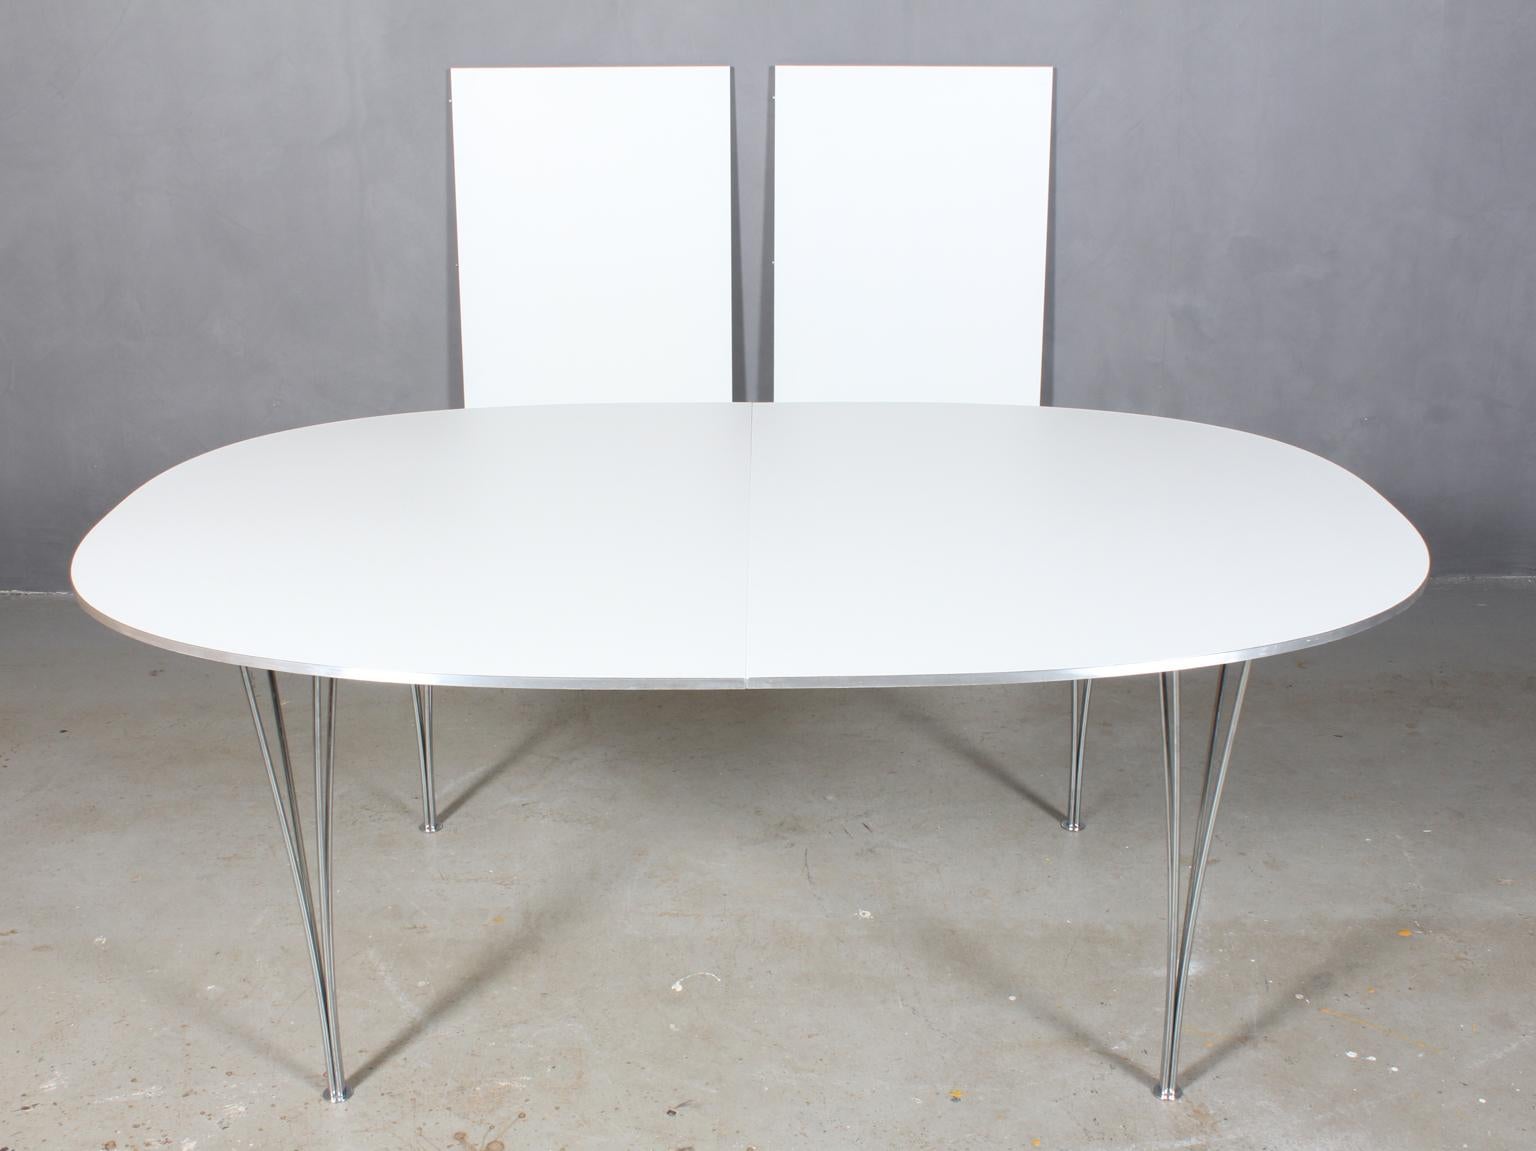 Piet Hein & Bruno Mathsson dining table with new professional lacquered white plate. Alu side list.

Two extension leaf of 60 cms.

Legs of chromed metal.

Model Super Elipse, made by Fritz Hansen.

This is one of the most iconic tables in